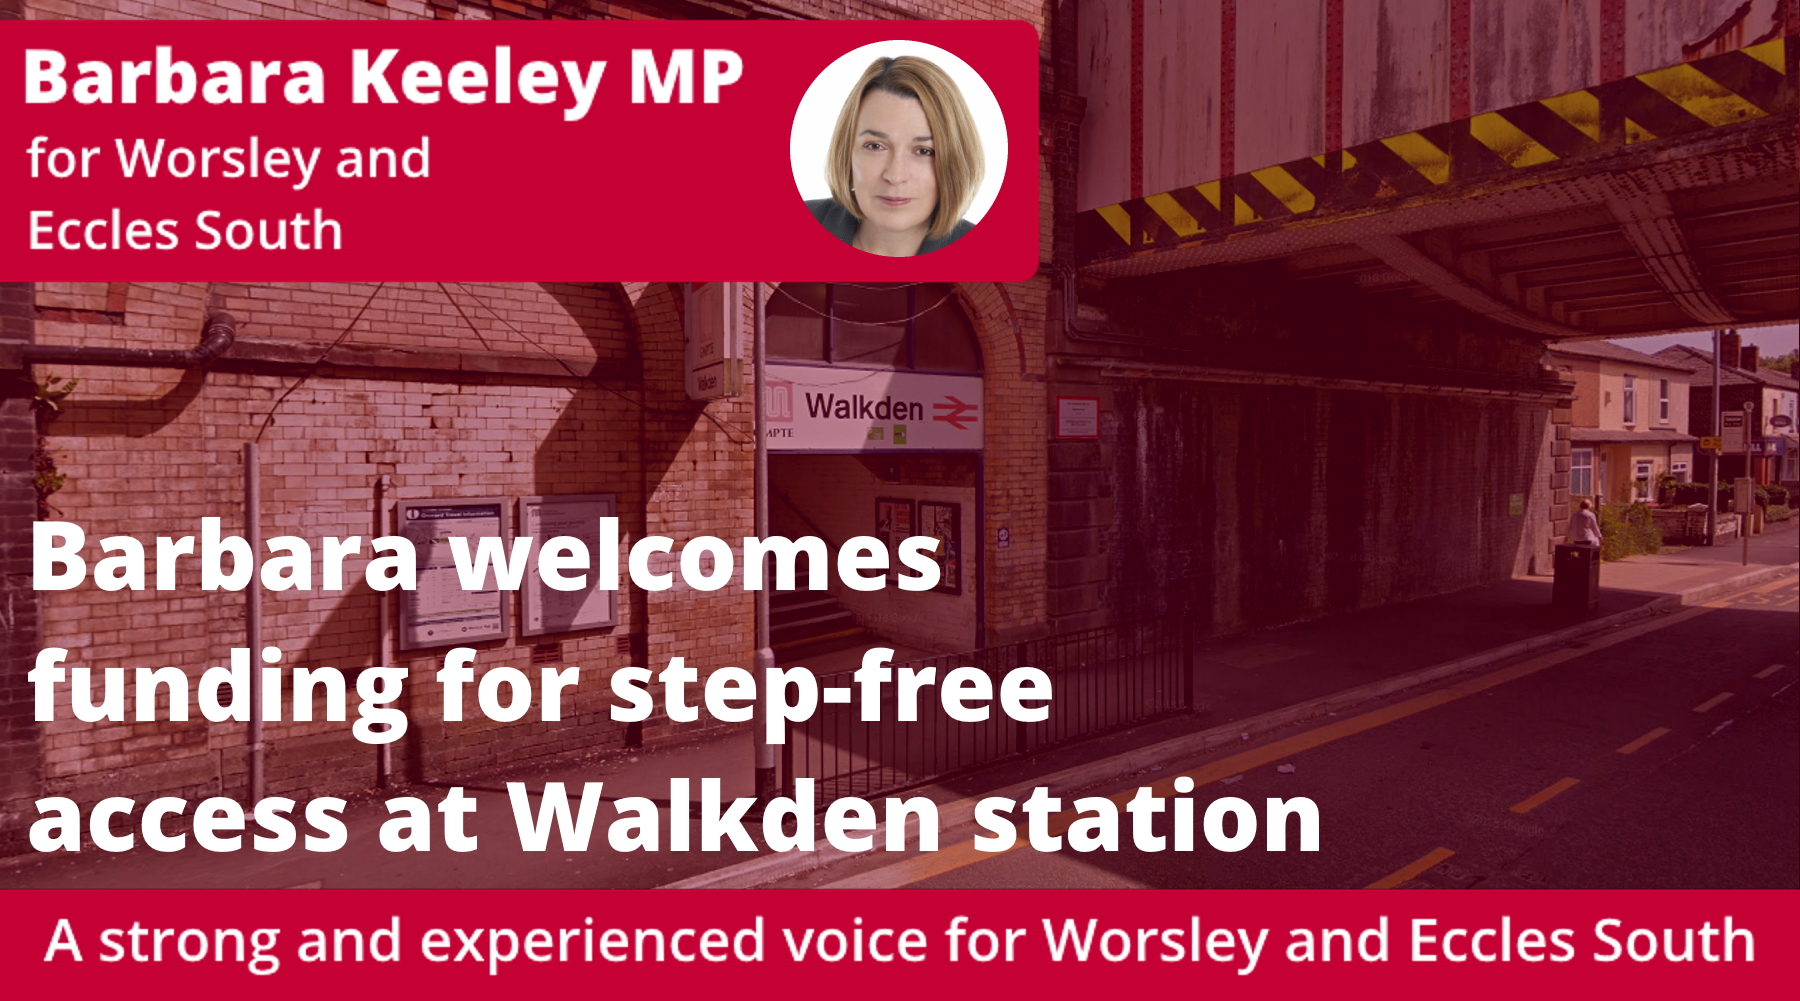 Barbara welcomes funding for step-free access at Walkden Station